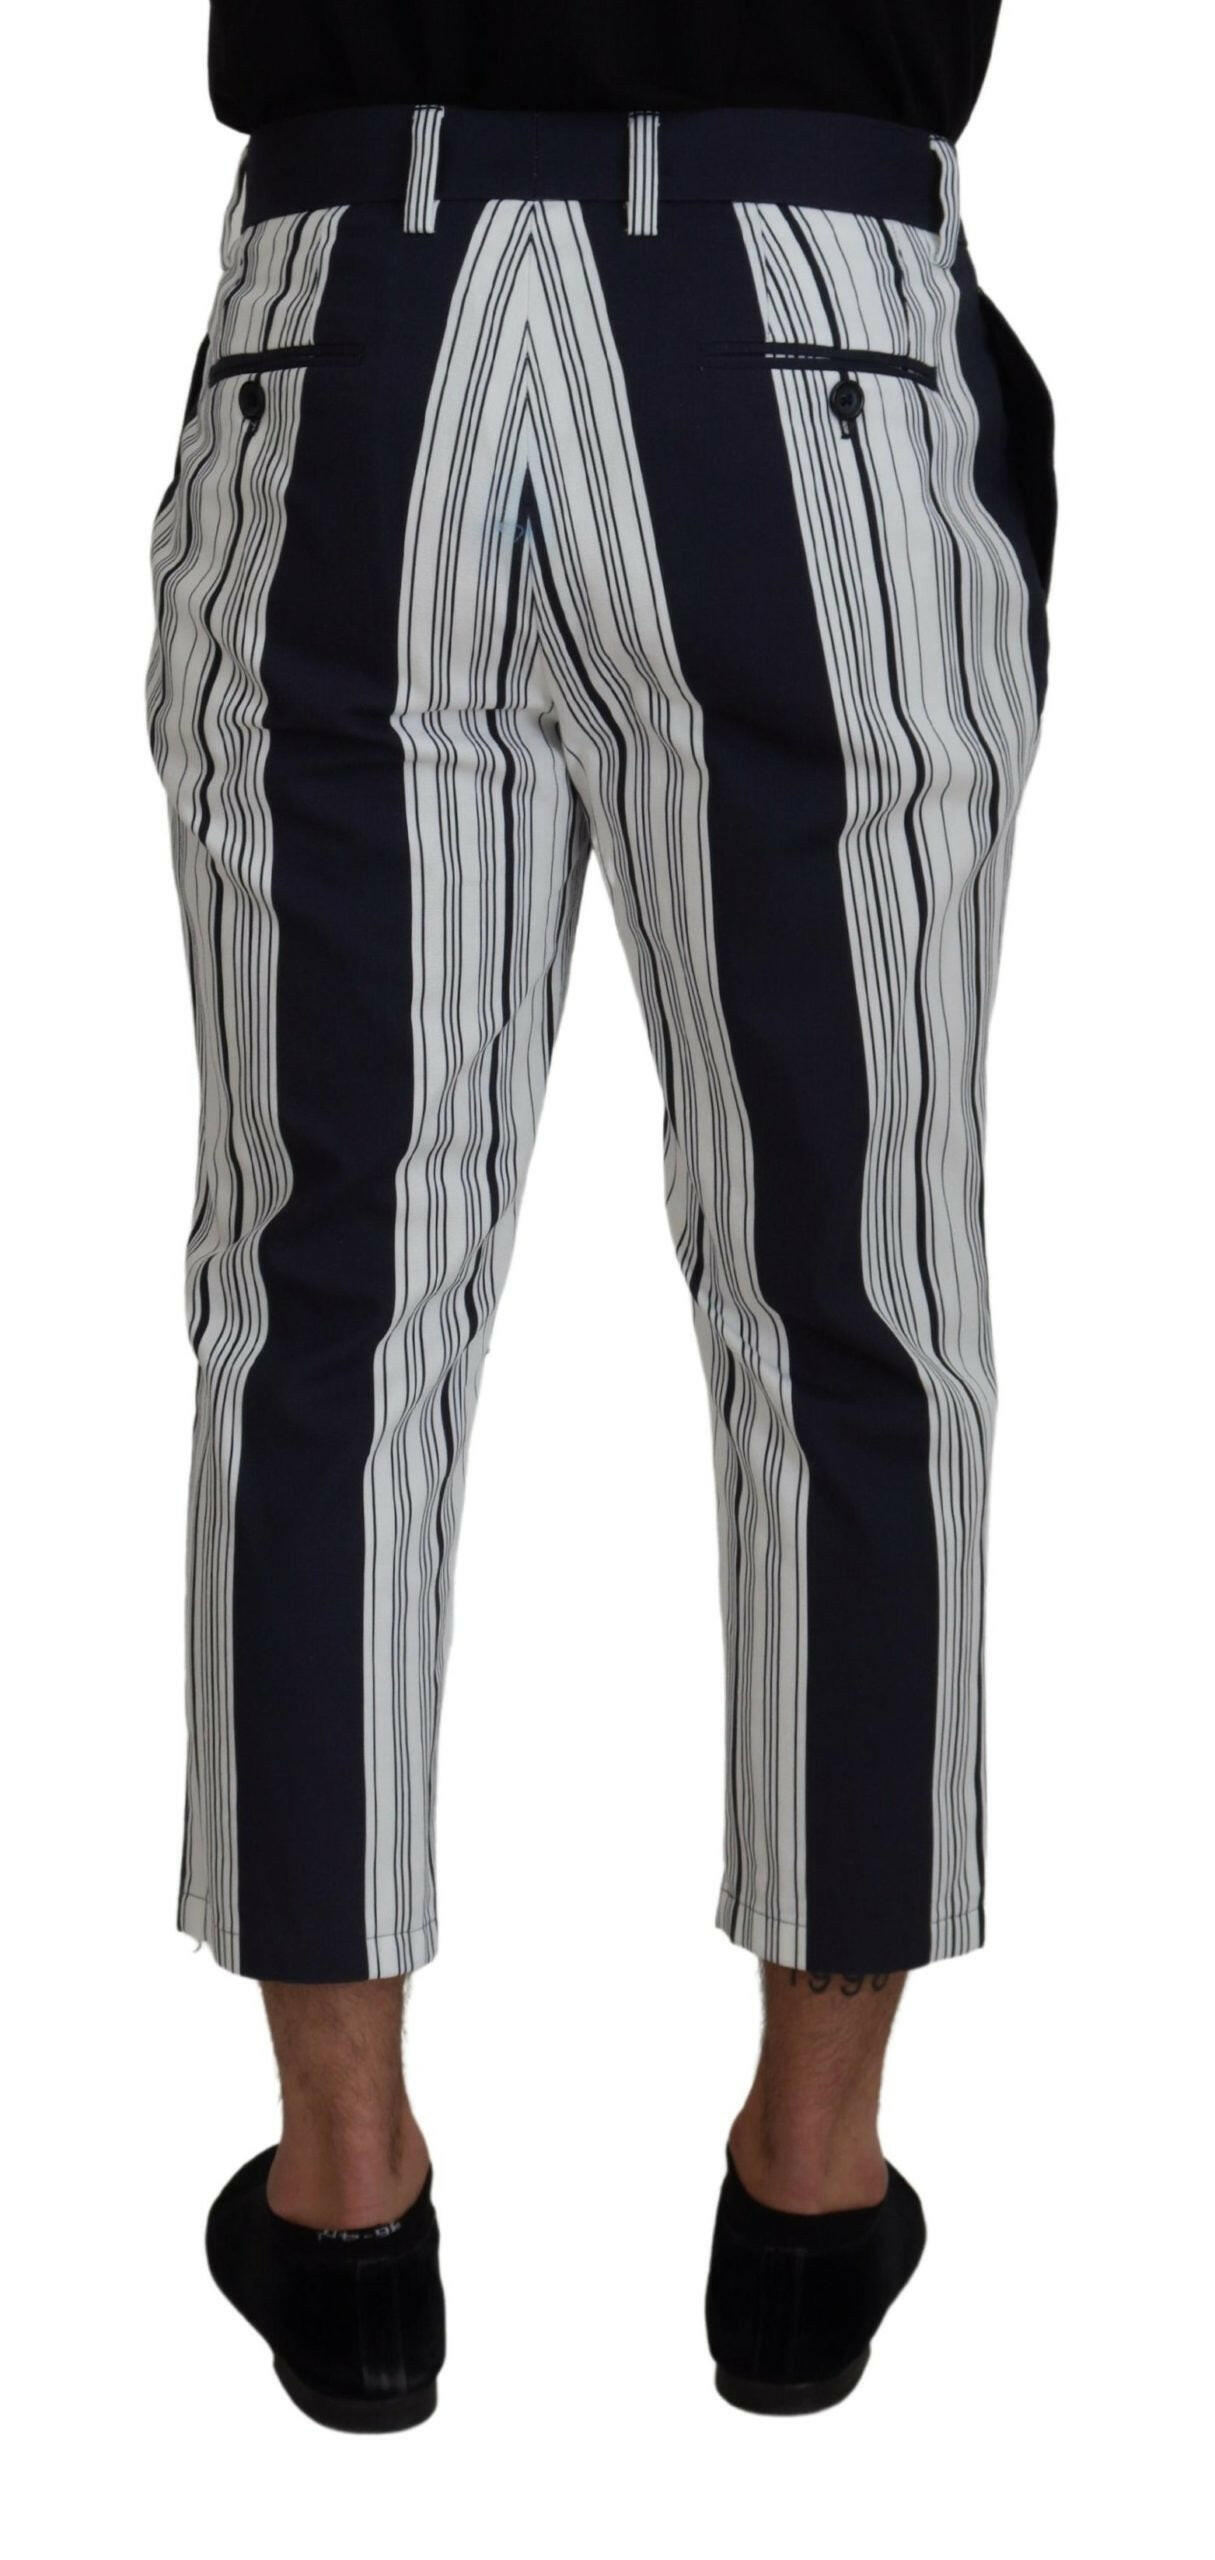 Dolce & Gabbana White Cotton Striped Cropped Pants - GENUINE AUTHENTIC BRAND LLC  